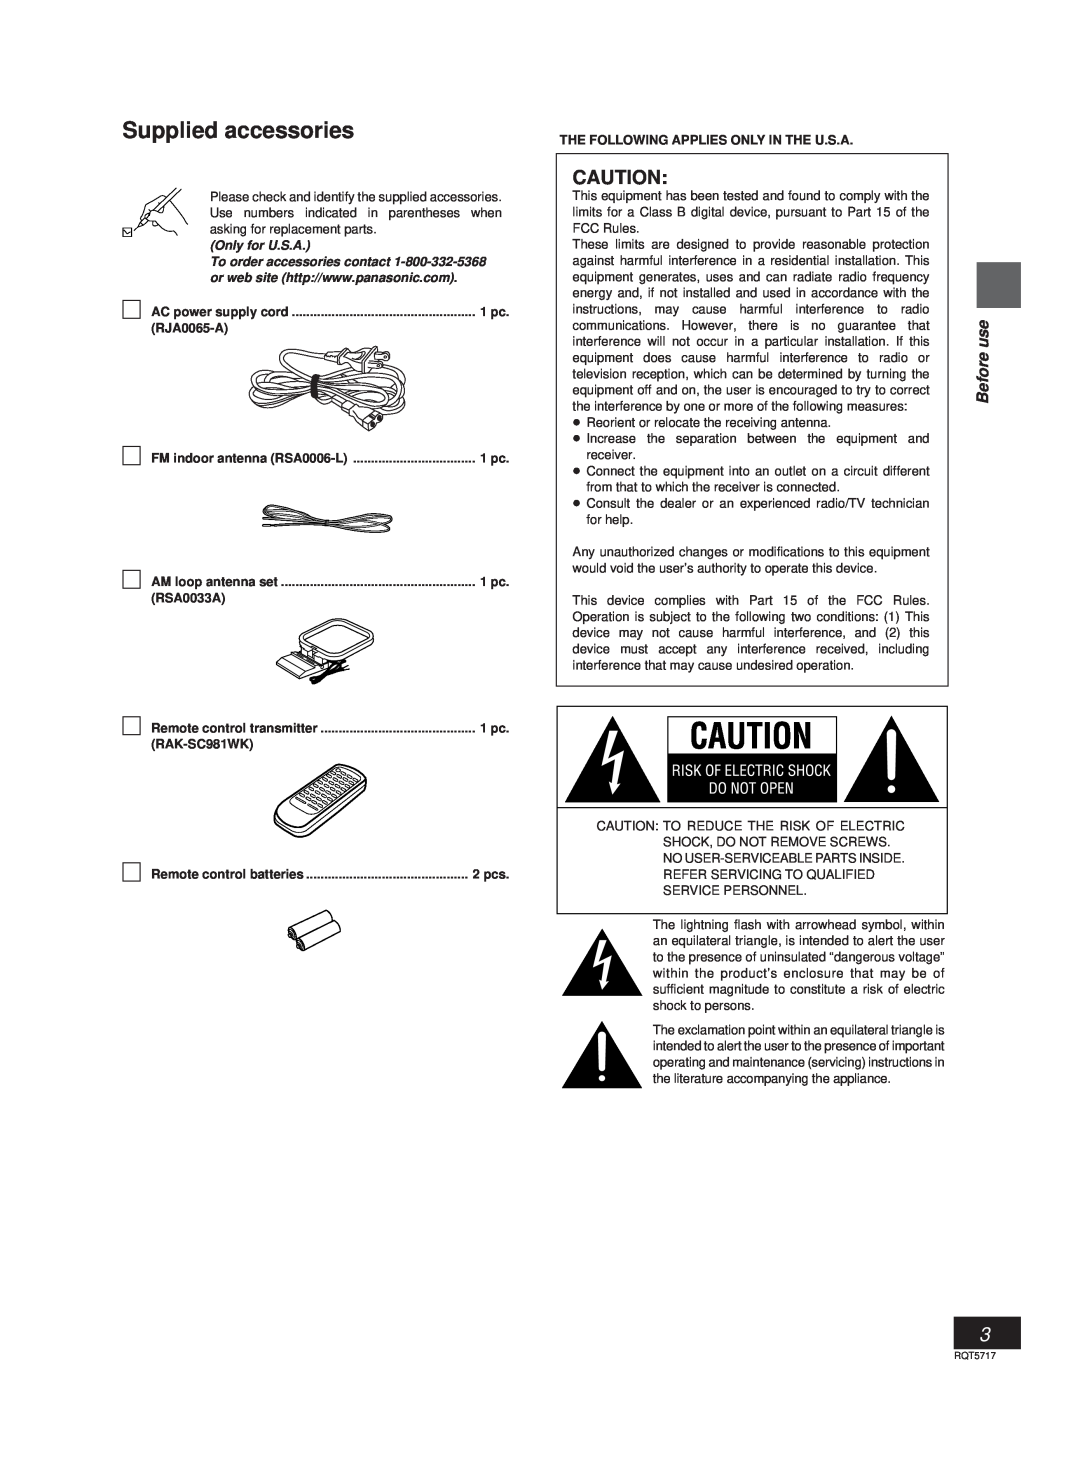 Panasonic SC-PM25 manual Supplied accessories, RJA0065-A, RSA0033A, RAK-SC981WK, The Following Applies Only In The U.S.A 